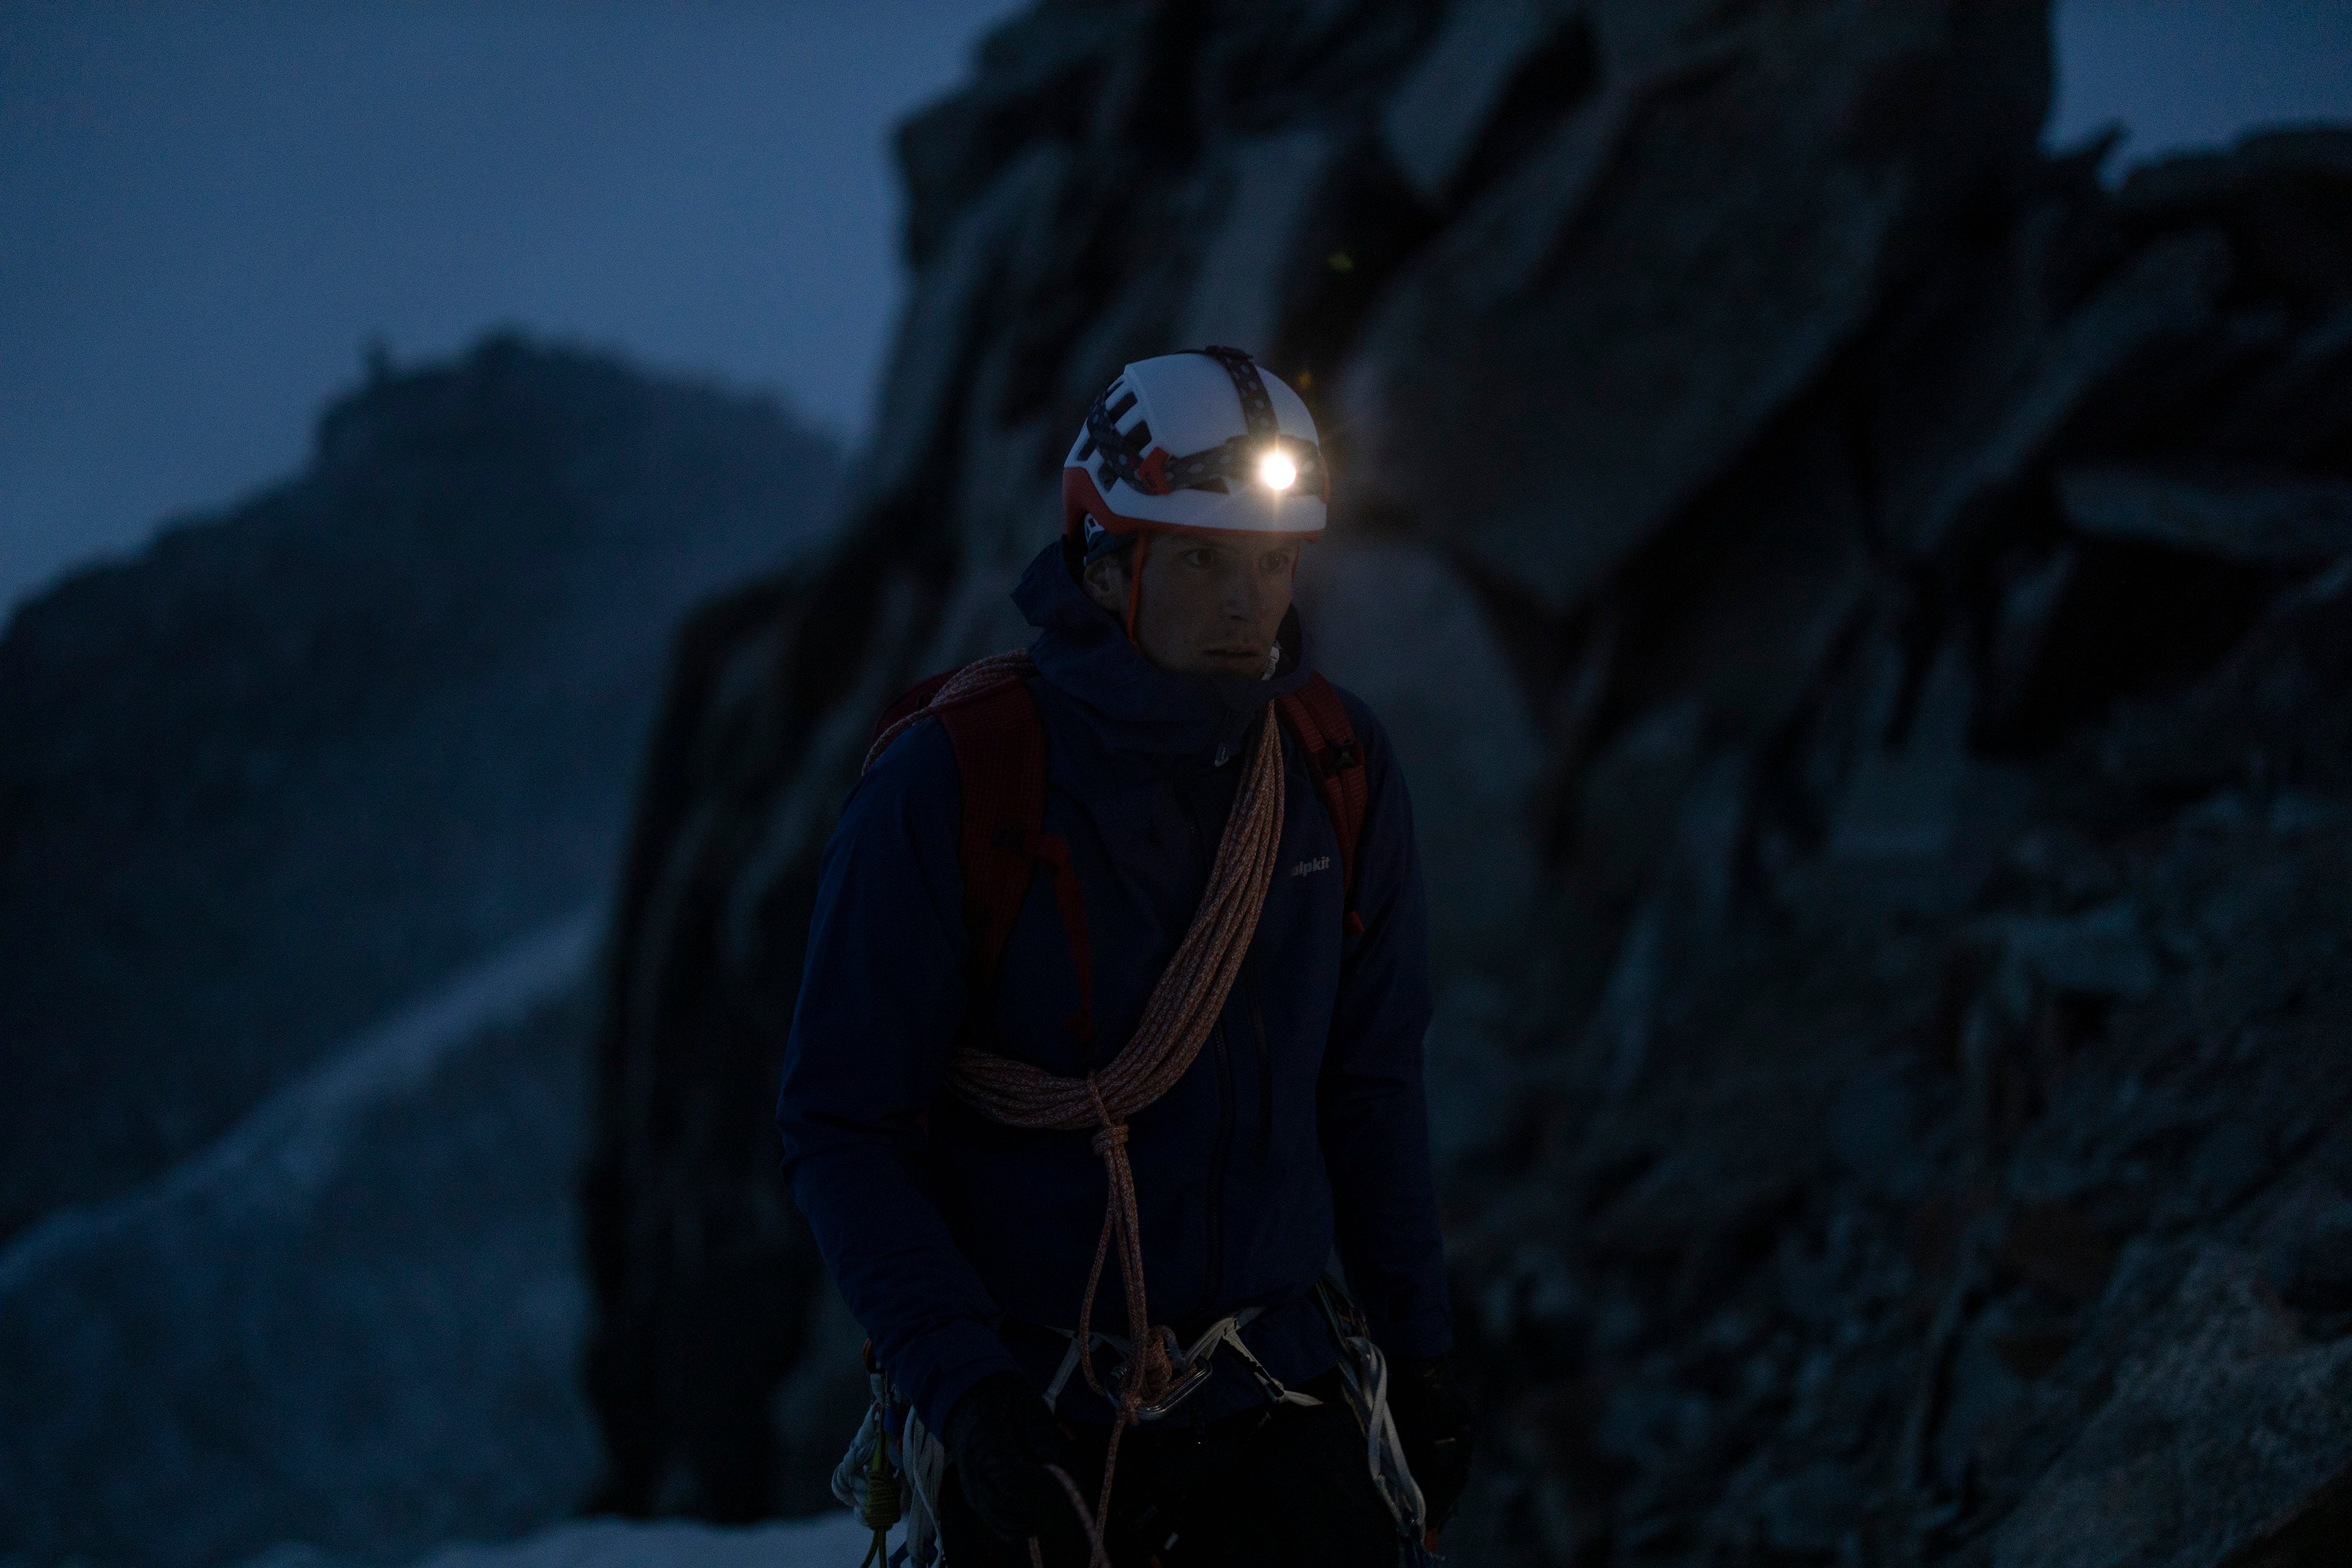 A man with a headtorch strapped over his climbing helmet